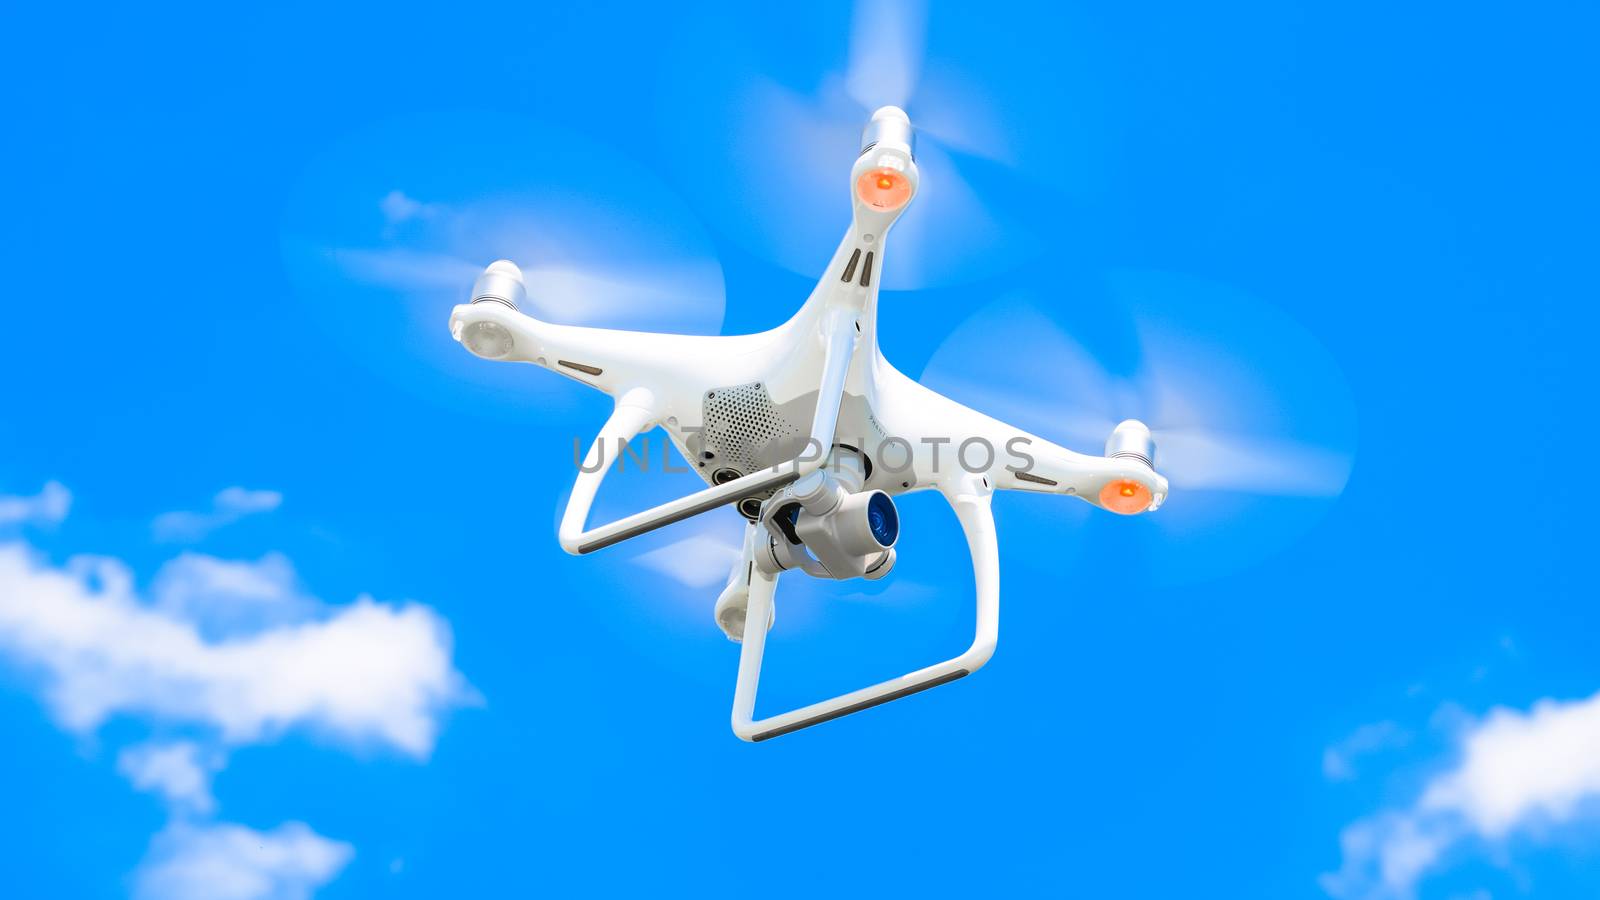 Drone DJI Phantom 4 in flight. Quadrocopter against the blue sky by eleonimages